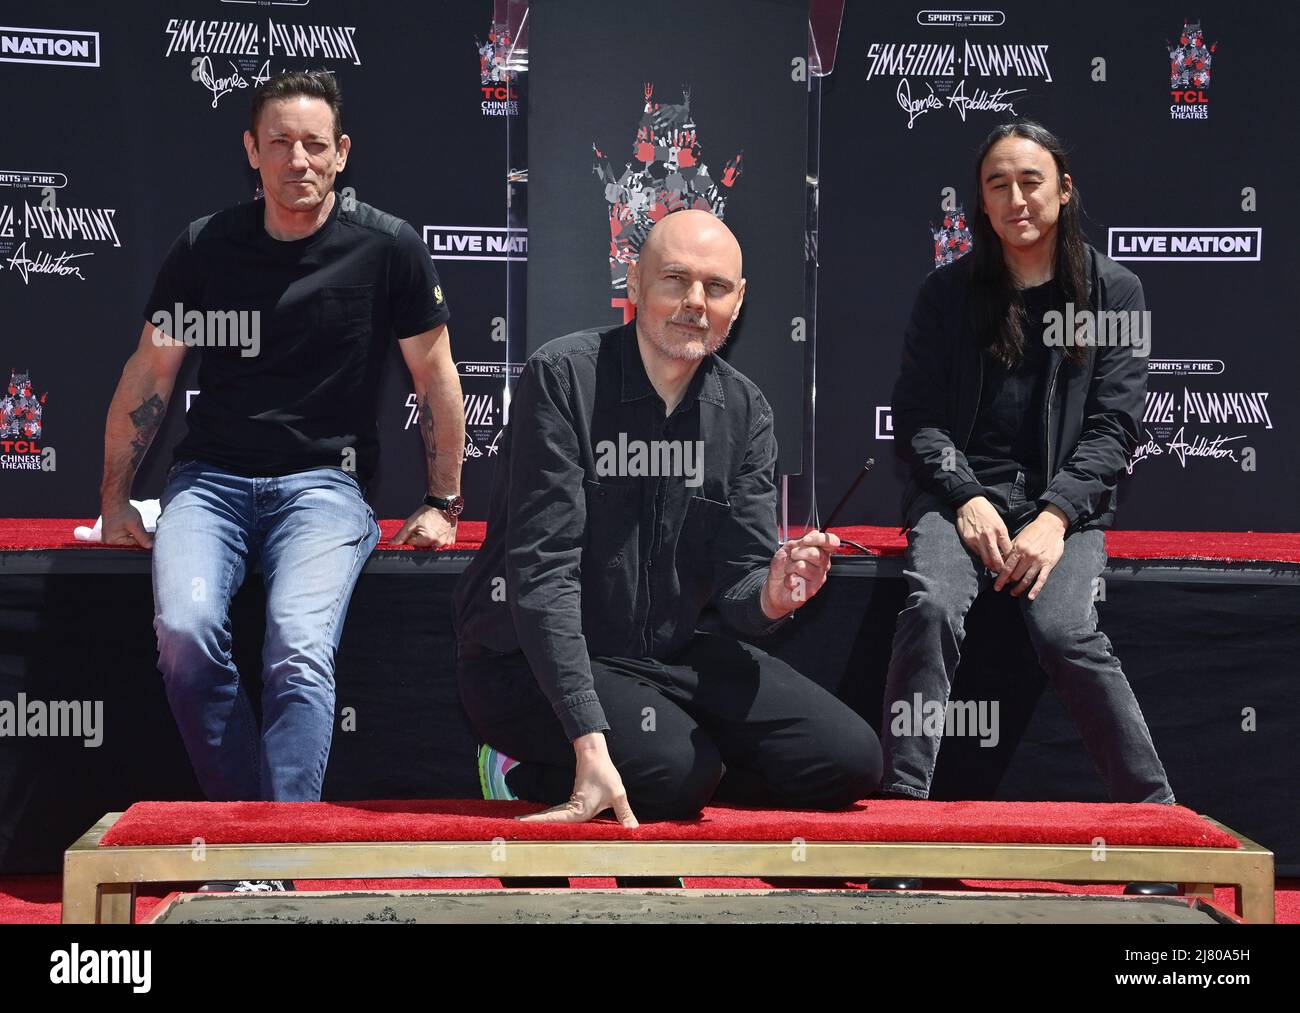 Los Angeles, United States. 11th May, 2022. Three members of the alternative rock band The Smashing Pumpkins, Jimmy Chamberlin, Billy Corgan, and Jeff Schroeder (L-R) participate in a handprint ceremony immortalizing them in the forecourt of the TCL Chinese Theatre (formerly Grauman's) in the Hollywood section of Los Angeles on Wednesday, May 11, 2022. Photo by Jim Ruymen/UPI Credit: UPI/Alamy Live News Stock Photo